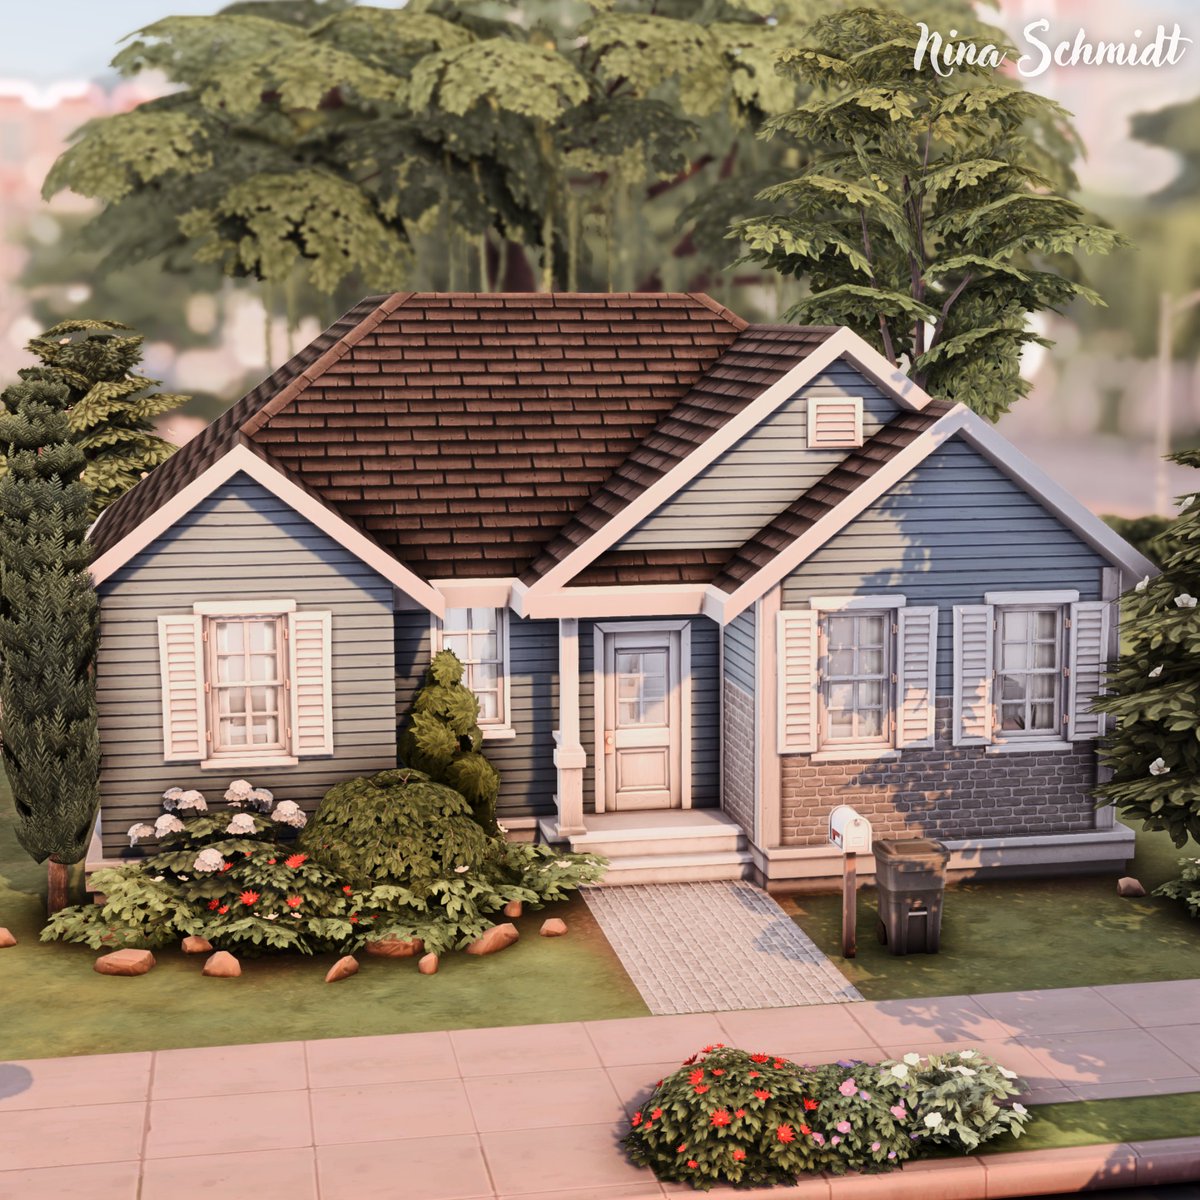 BASE GAME STARTER HOUSE 🏡 youtu.be/4BHpgzaYbdM

#TheSims #TheSims4 #ShowUsYourBuilds